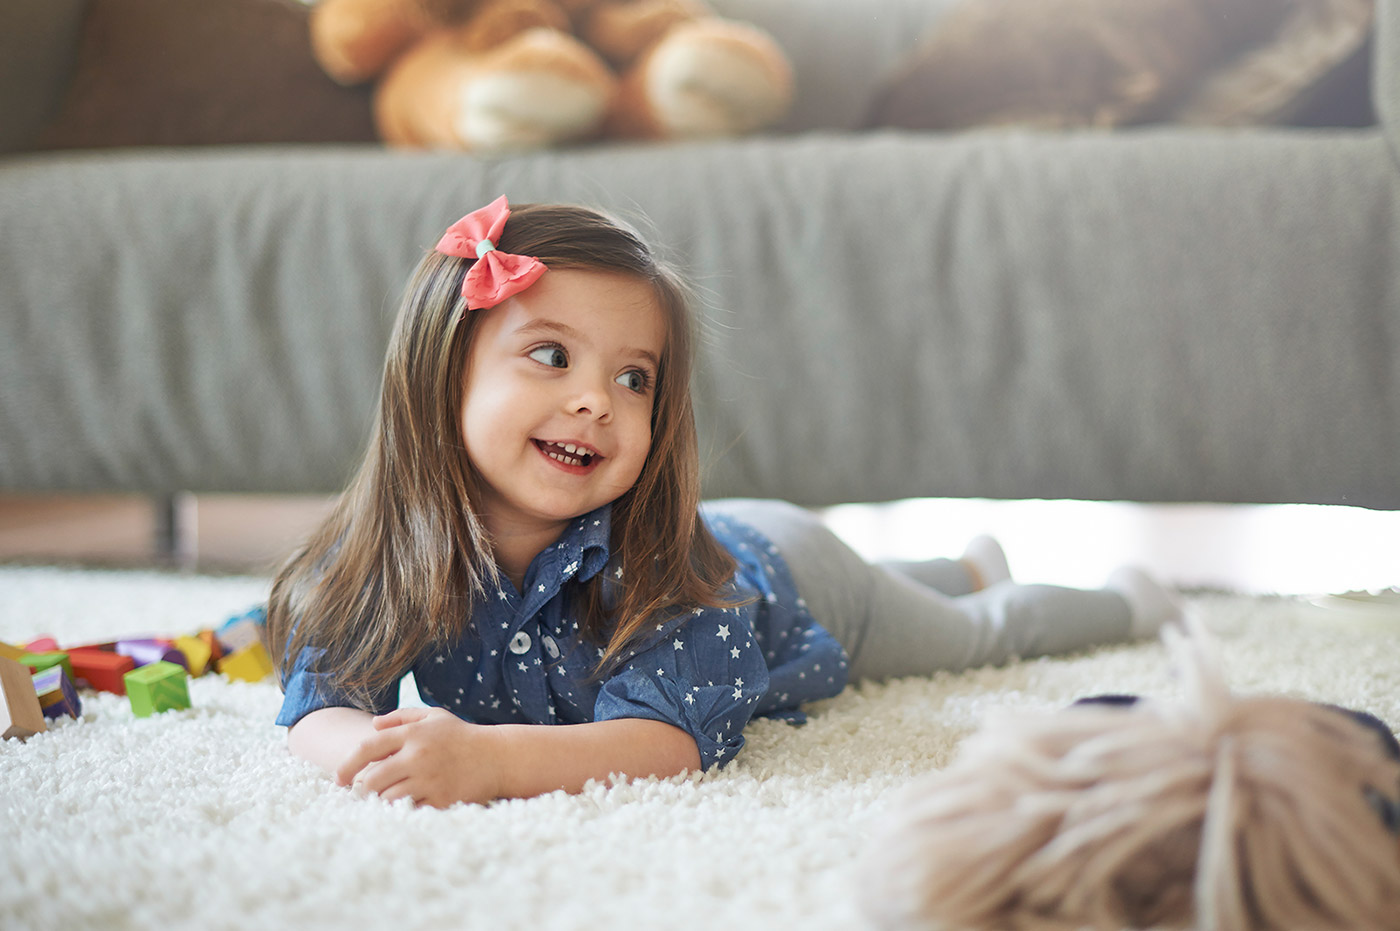 A young girl playing on a living room rug.